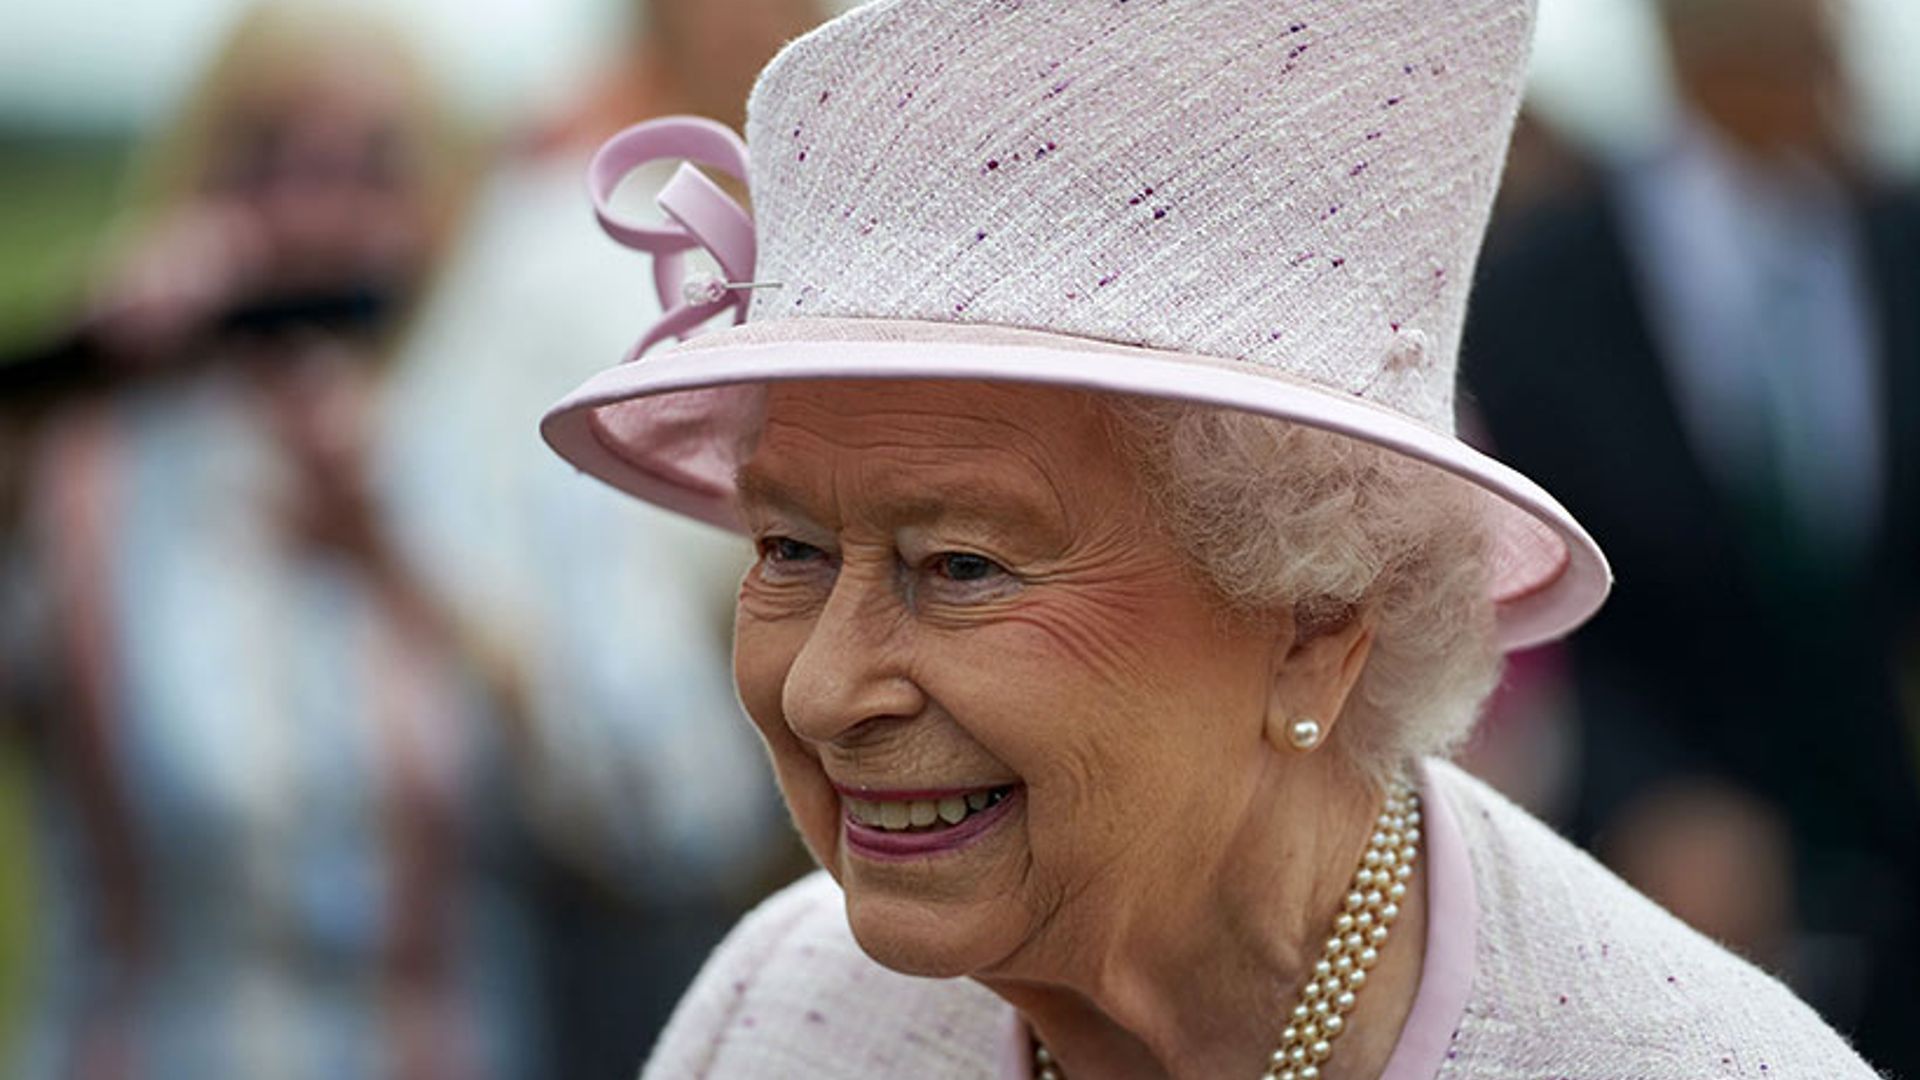 The Queen shocks locals by visiting Scotland pub for dinner